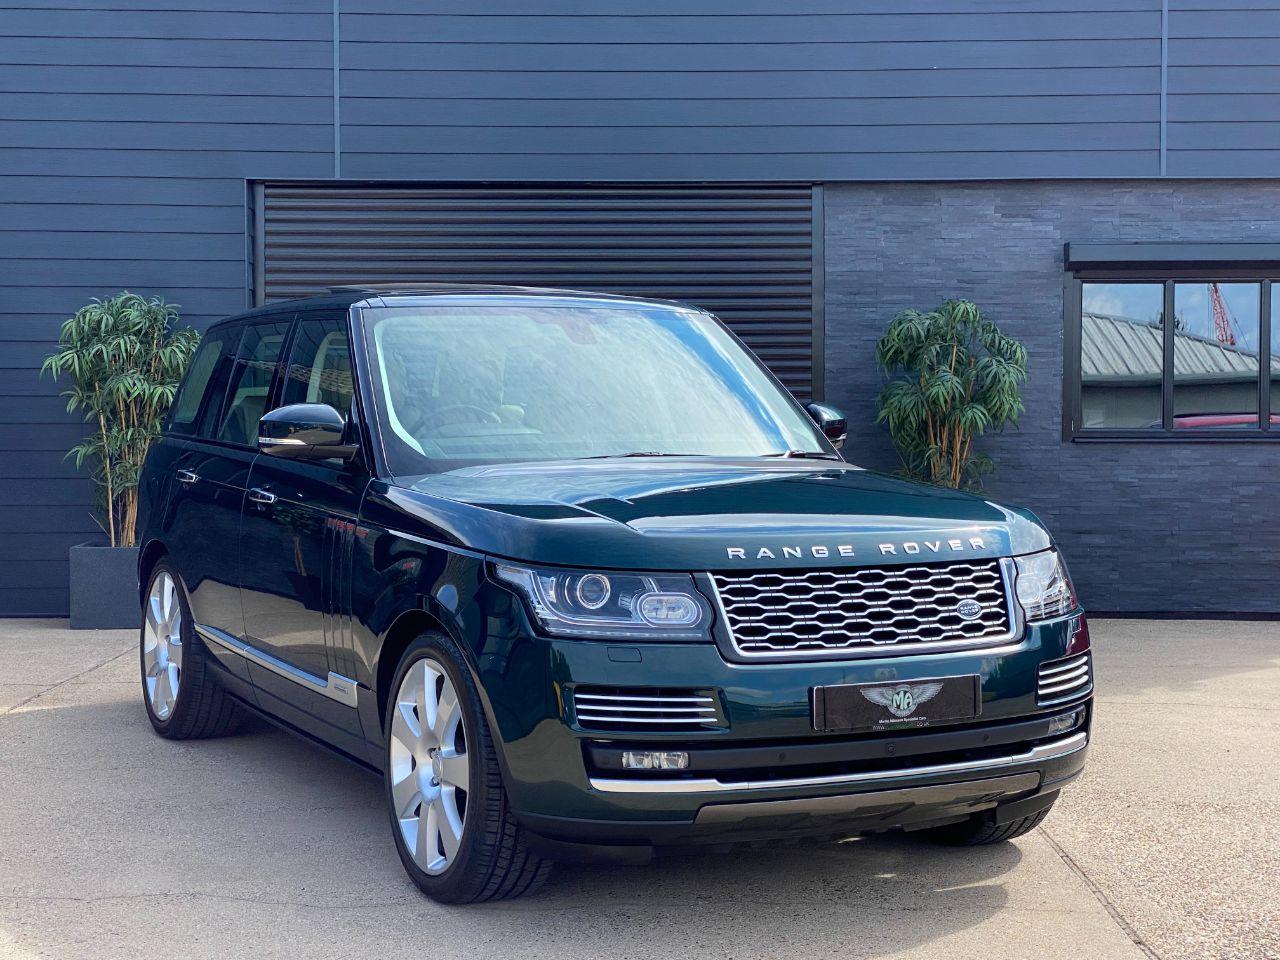 Land Rover Range Rover 5.0 V8 Supercharged Autobiography 4dr Auto Estate Petrol Aintree Green Metallic